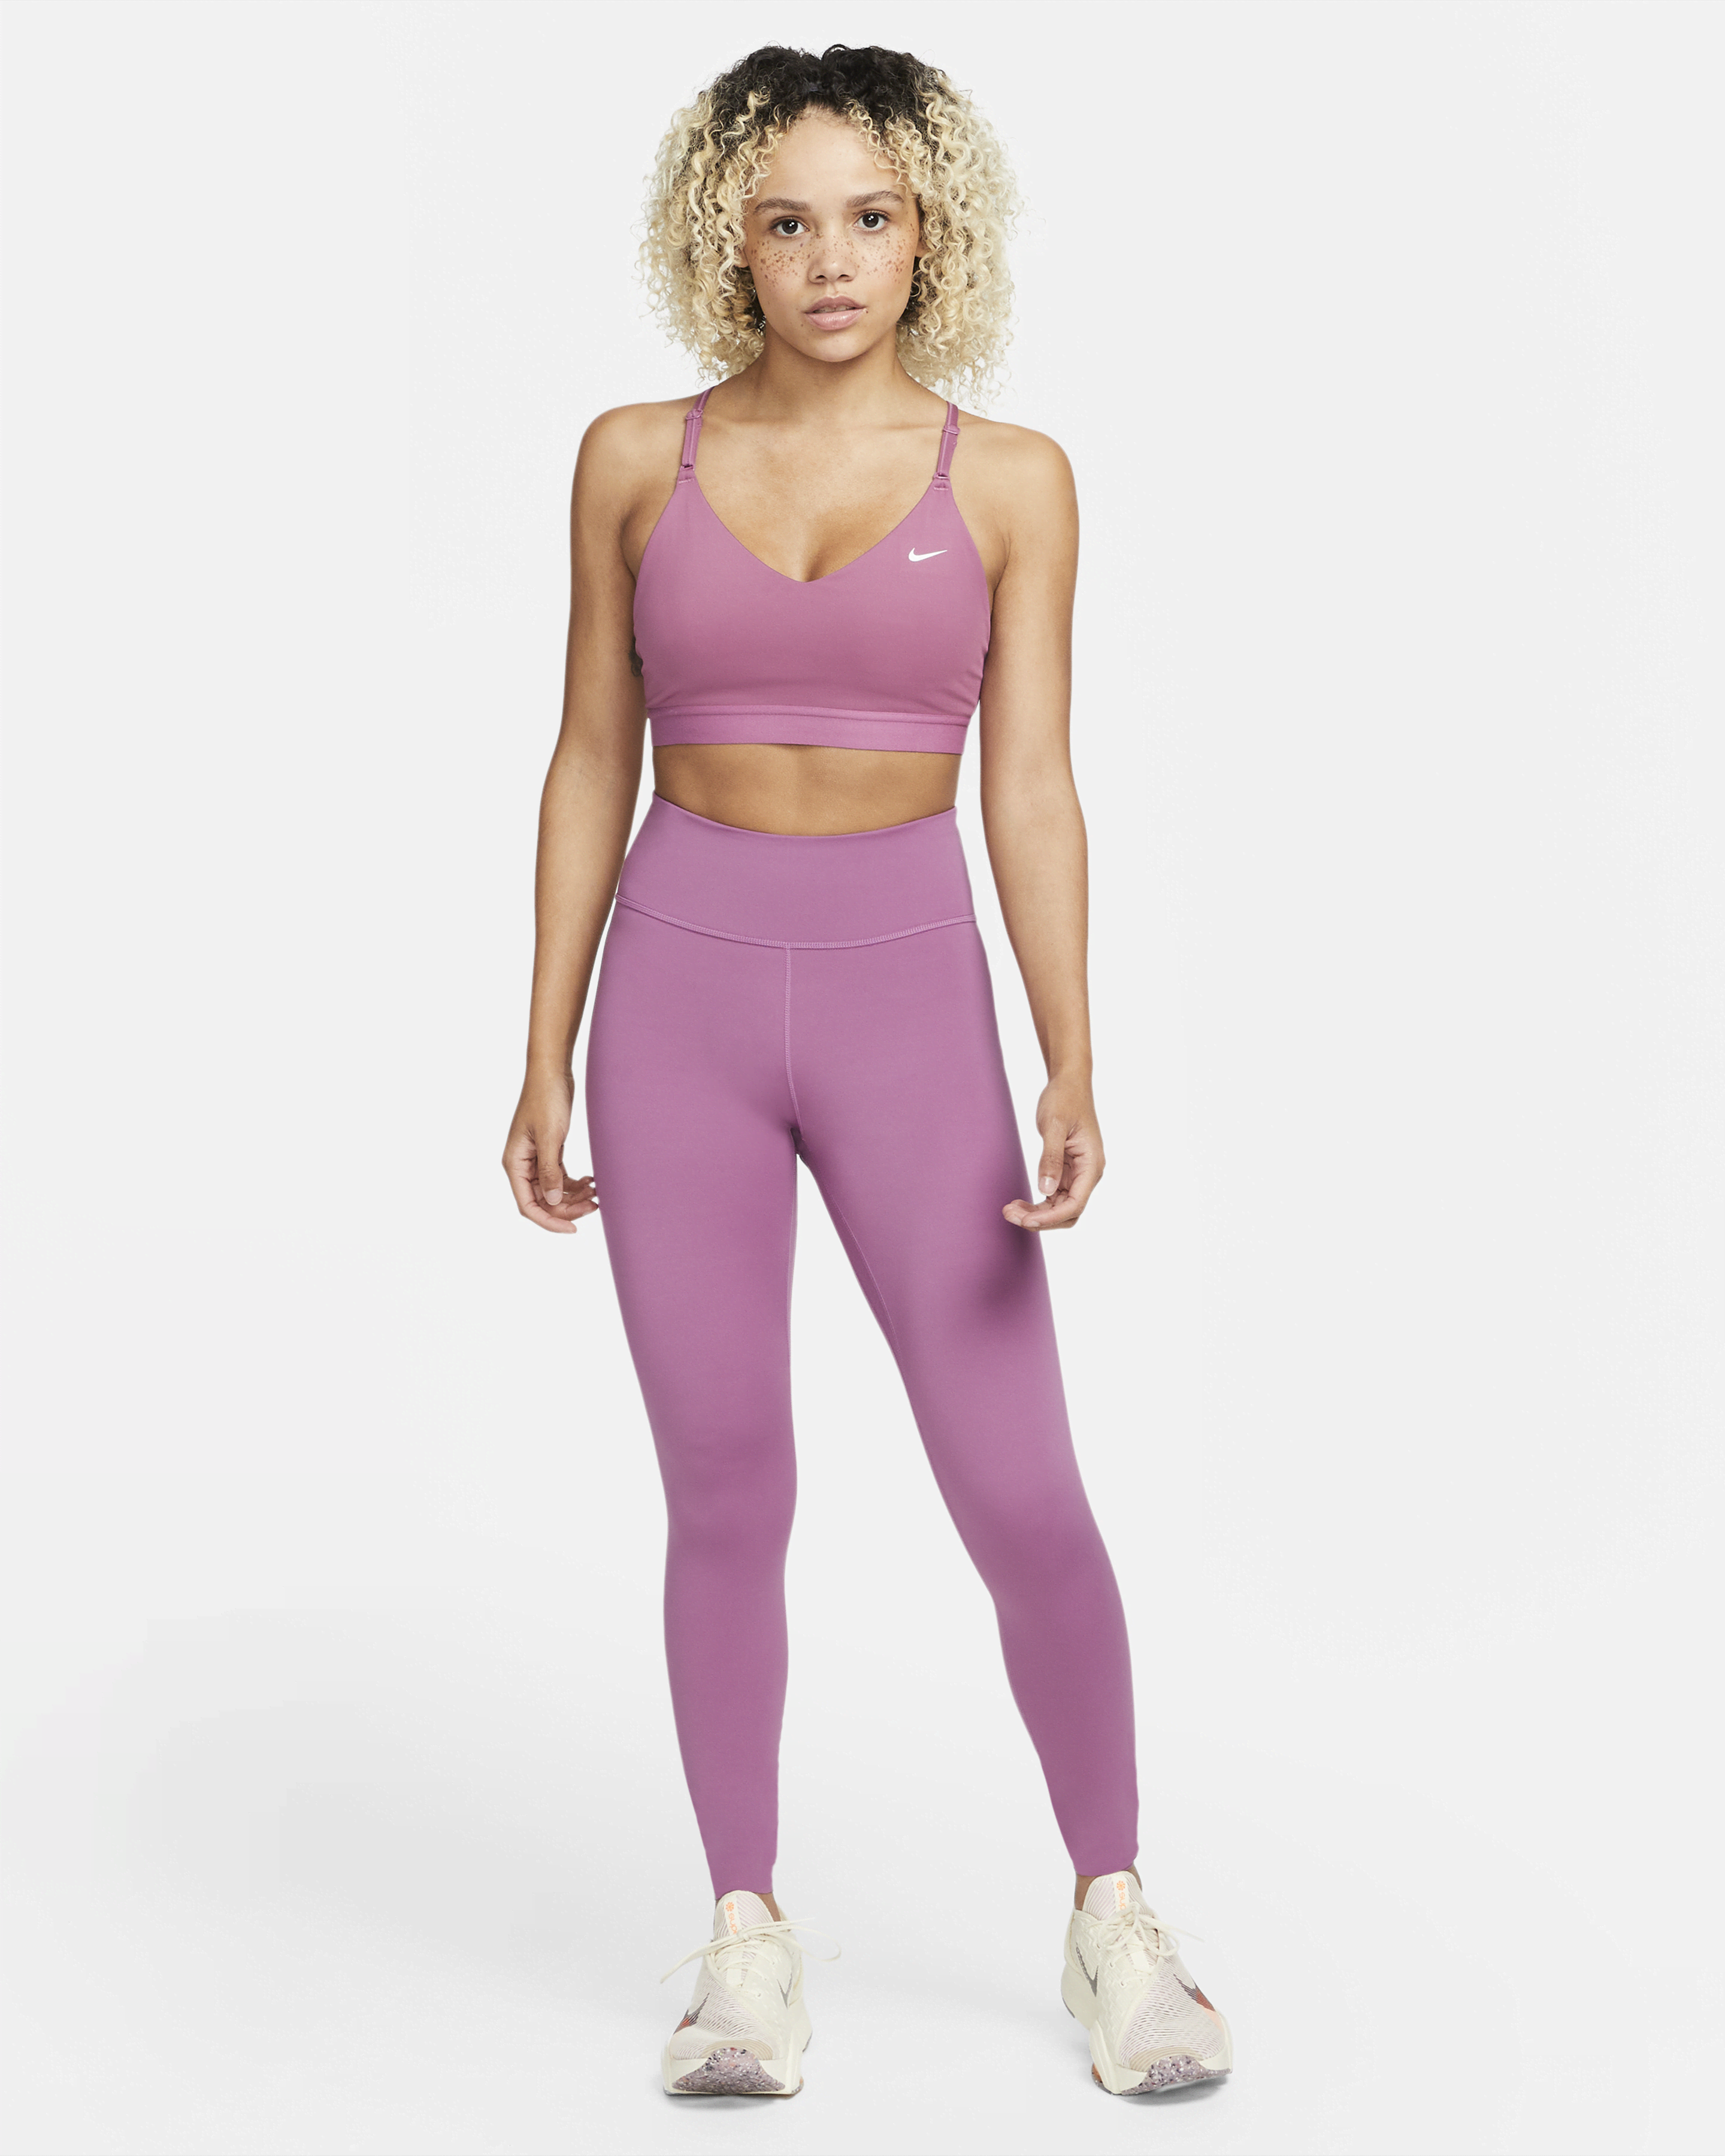 Nike Training One Luxe leggings in hot pink